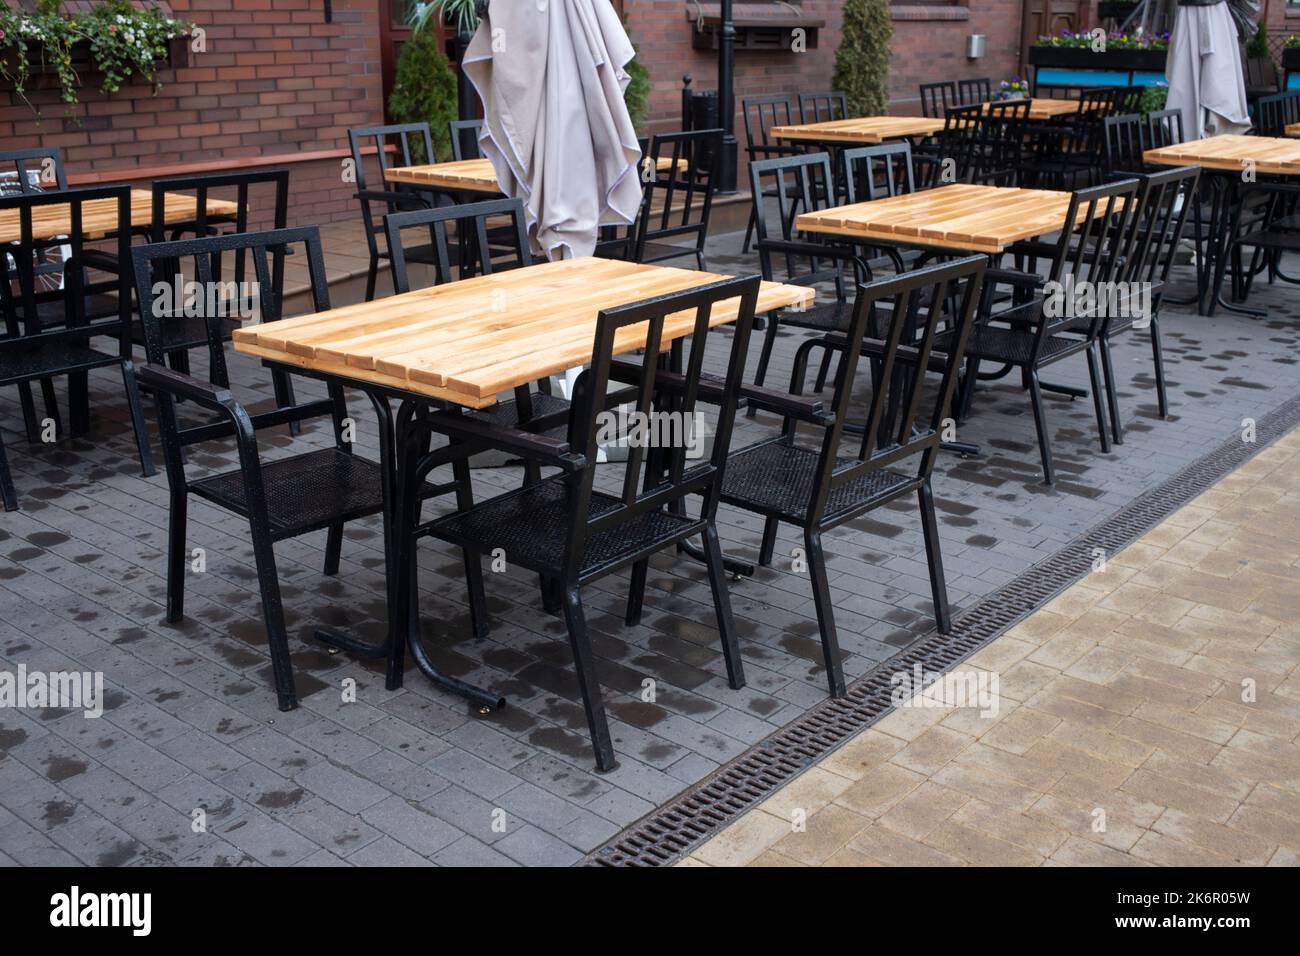 Cafe table and chairs on the street KALiningrad. Wooden table with black chairs Stock Photo